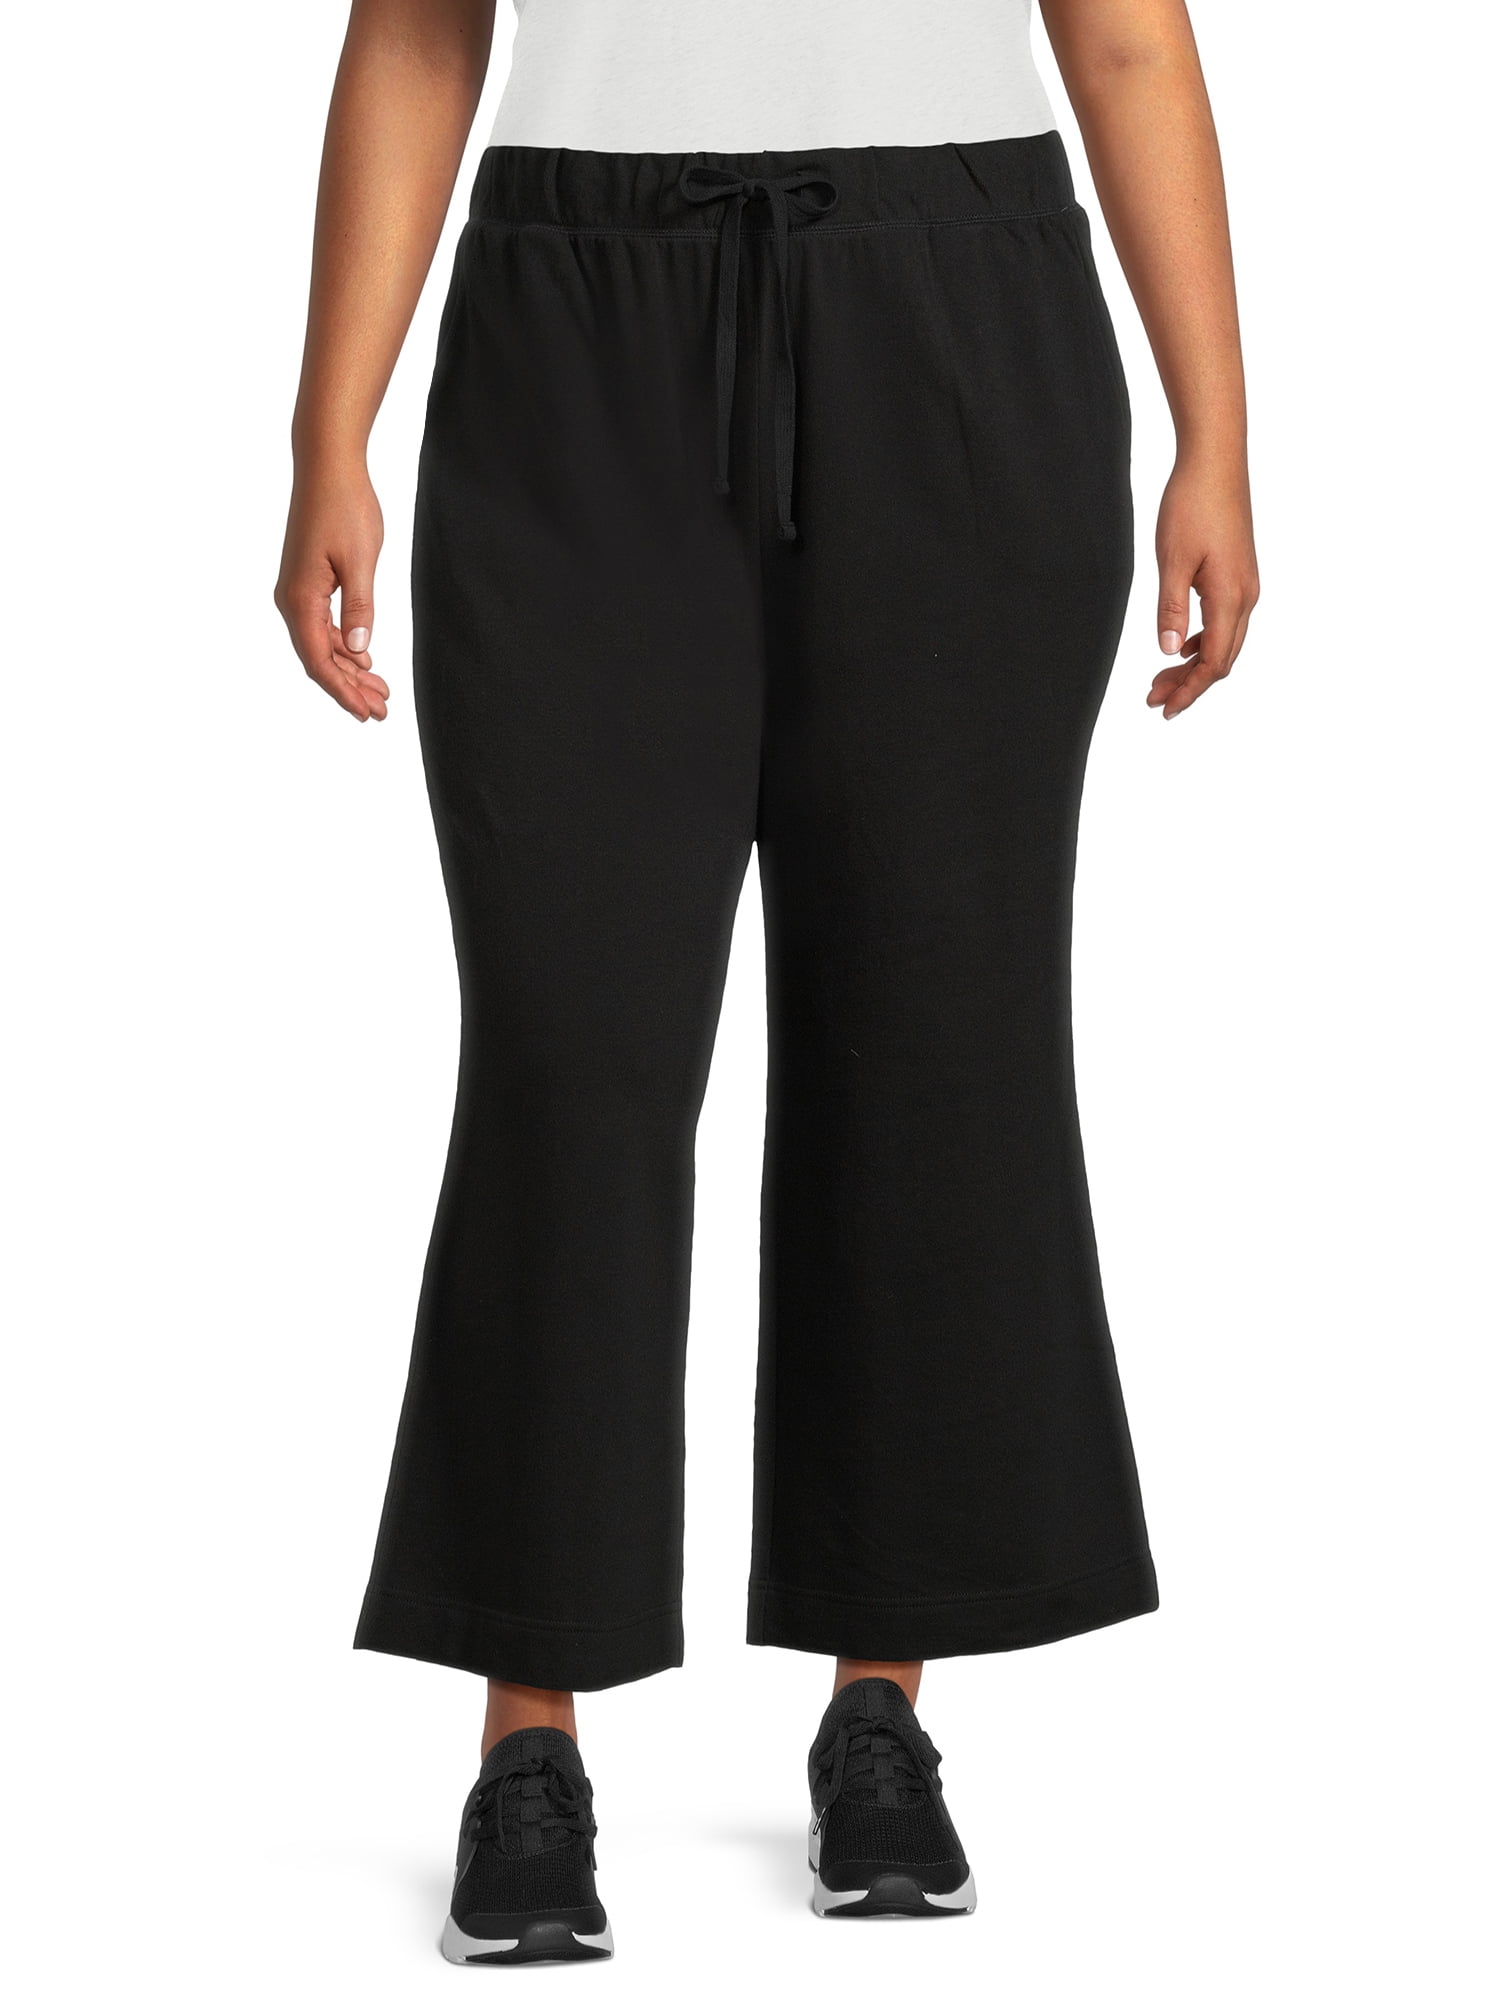 Terra & Sky Women's Plus Size French Terry Pull On Pants - Walmart.com